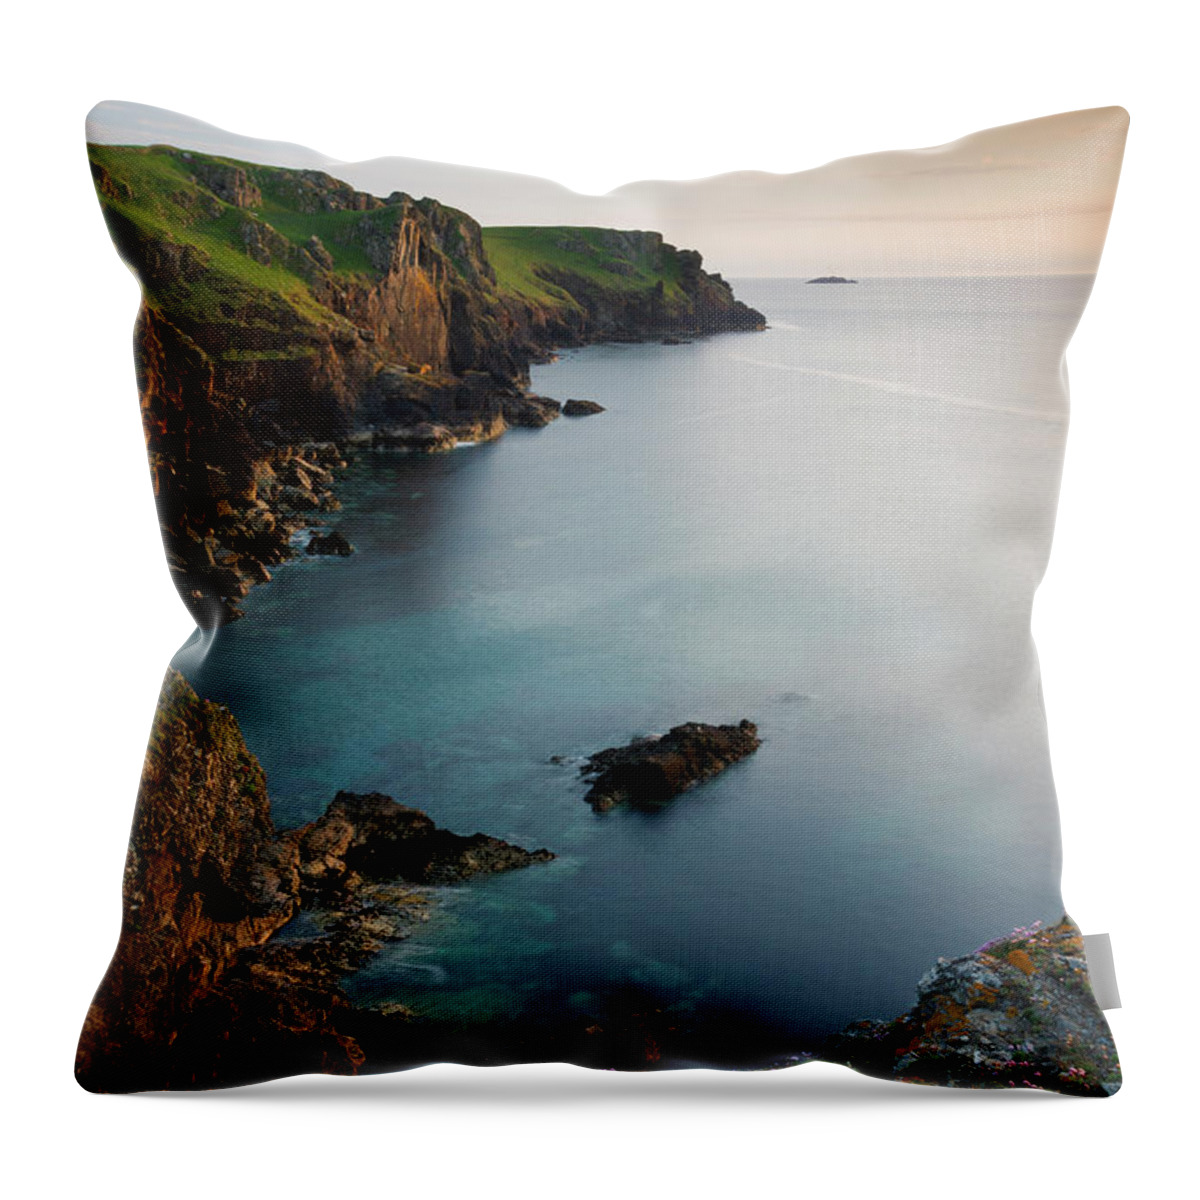 Scenics Throw Pillow featuring the photograph The Worlds Alright With Me by Daryl Hutchinson